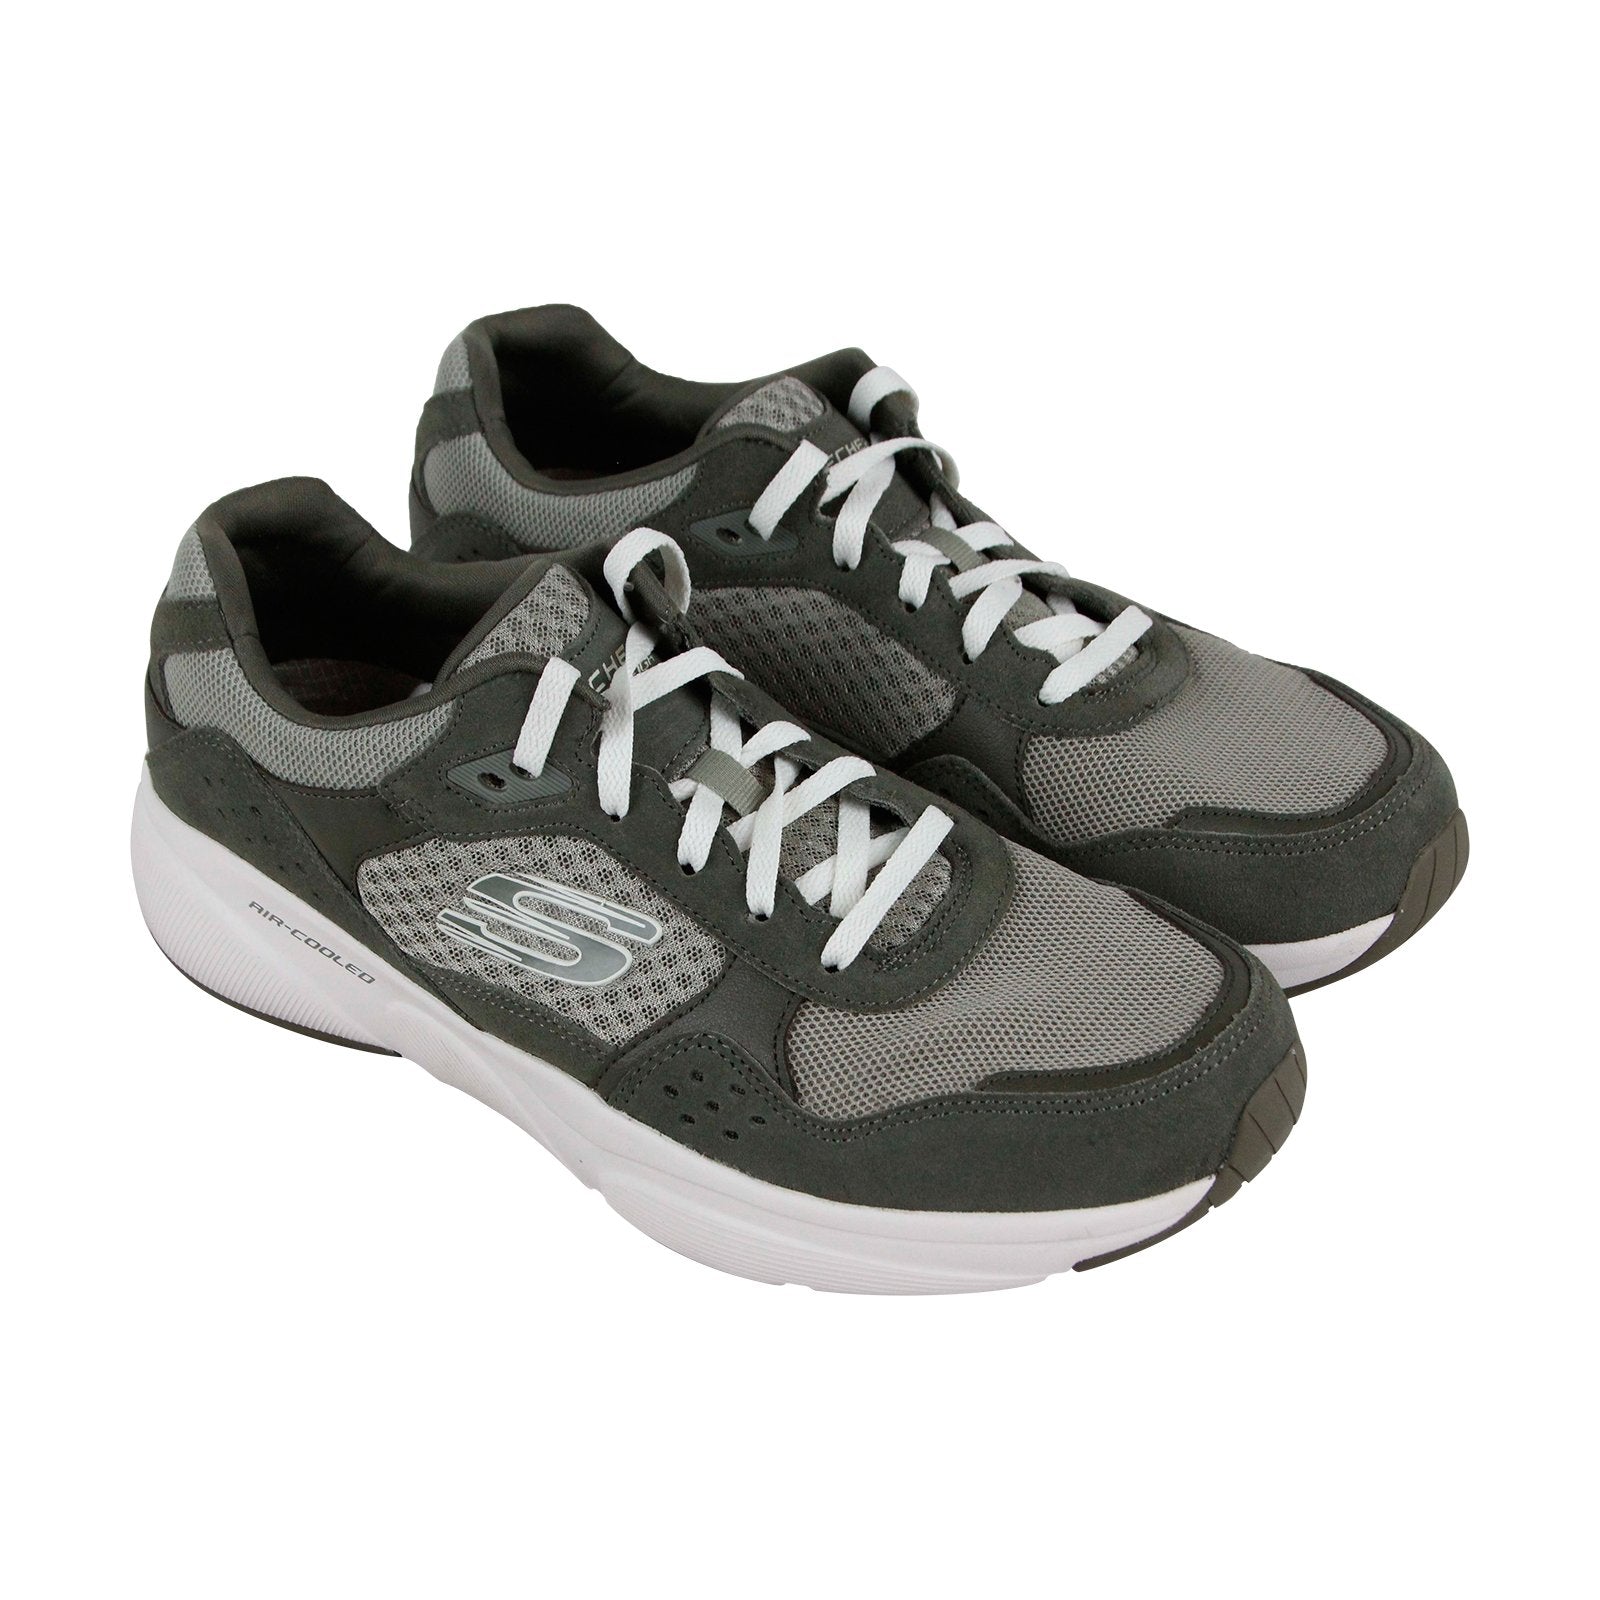 misericordia Cartero Antagonista Skechers Meridian Ostwall 52952 Mens Green Suede Casual Lifestyle Snea -  Ruze Shoes